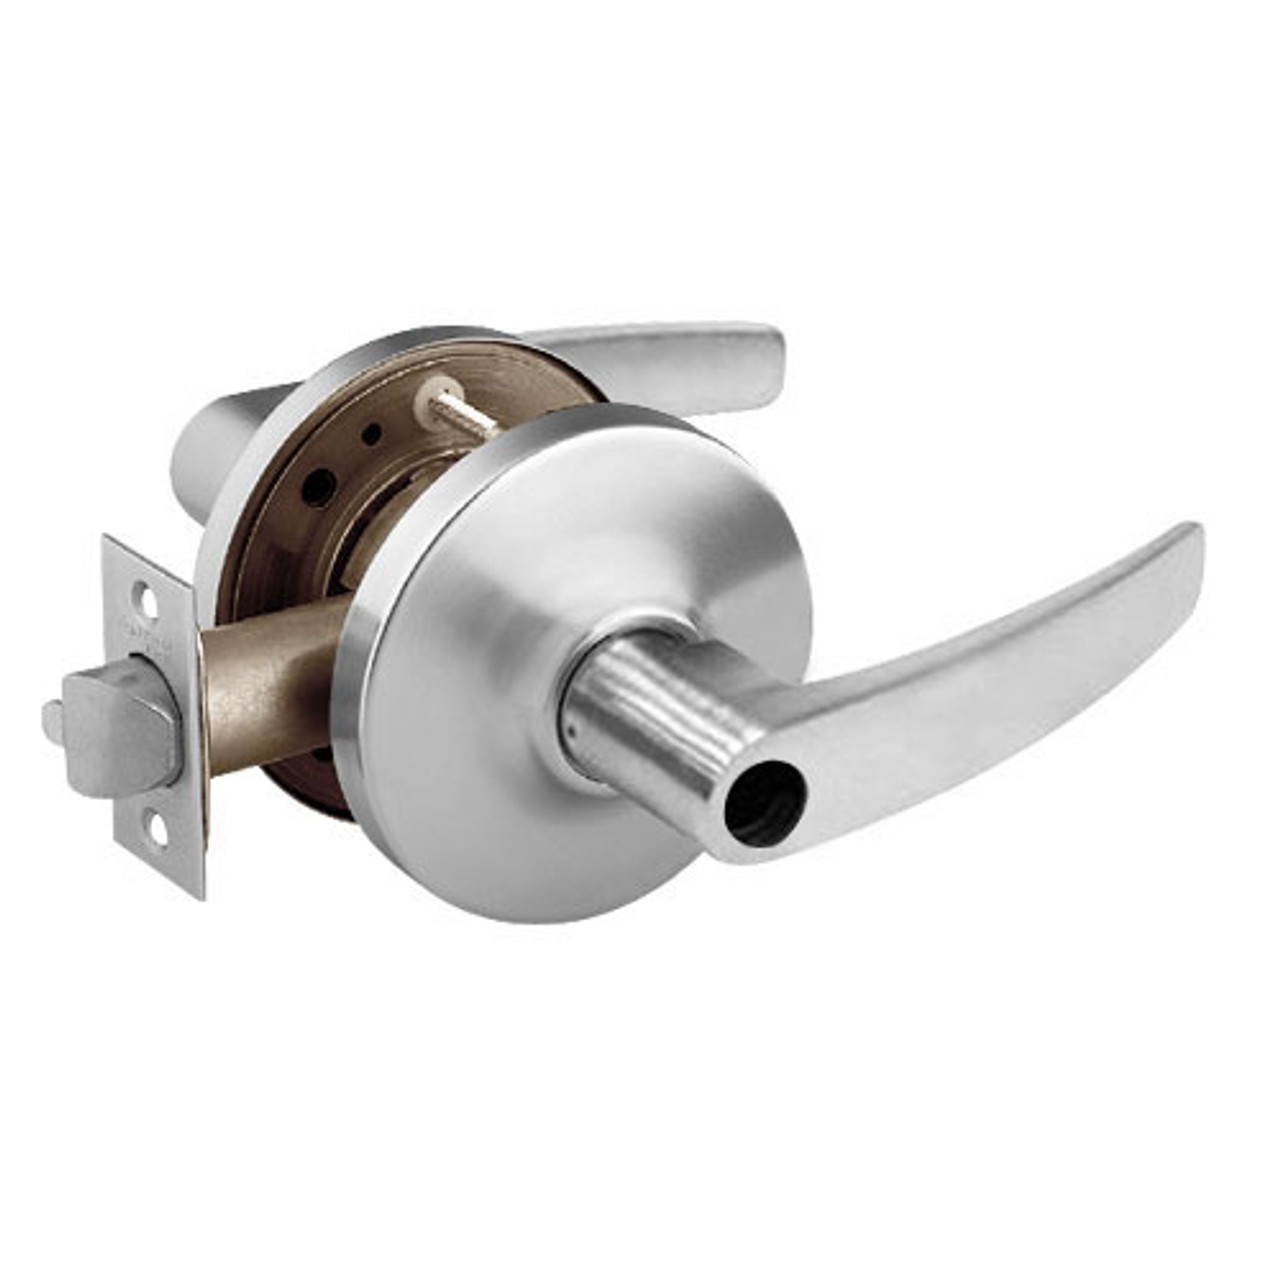 28LC-10G05-GB-26D Sargent 10 Line Cylindrical Entry/Office Locks with B Lever Design and G Rose Less Cylinder in Satin Chrome